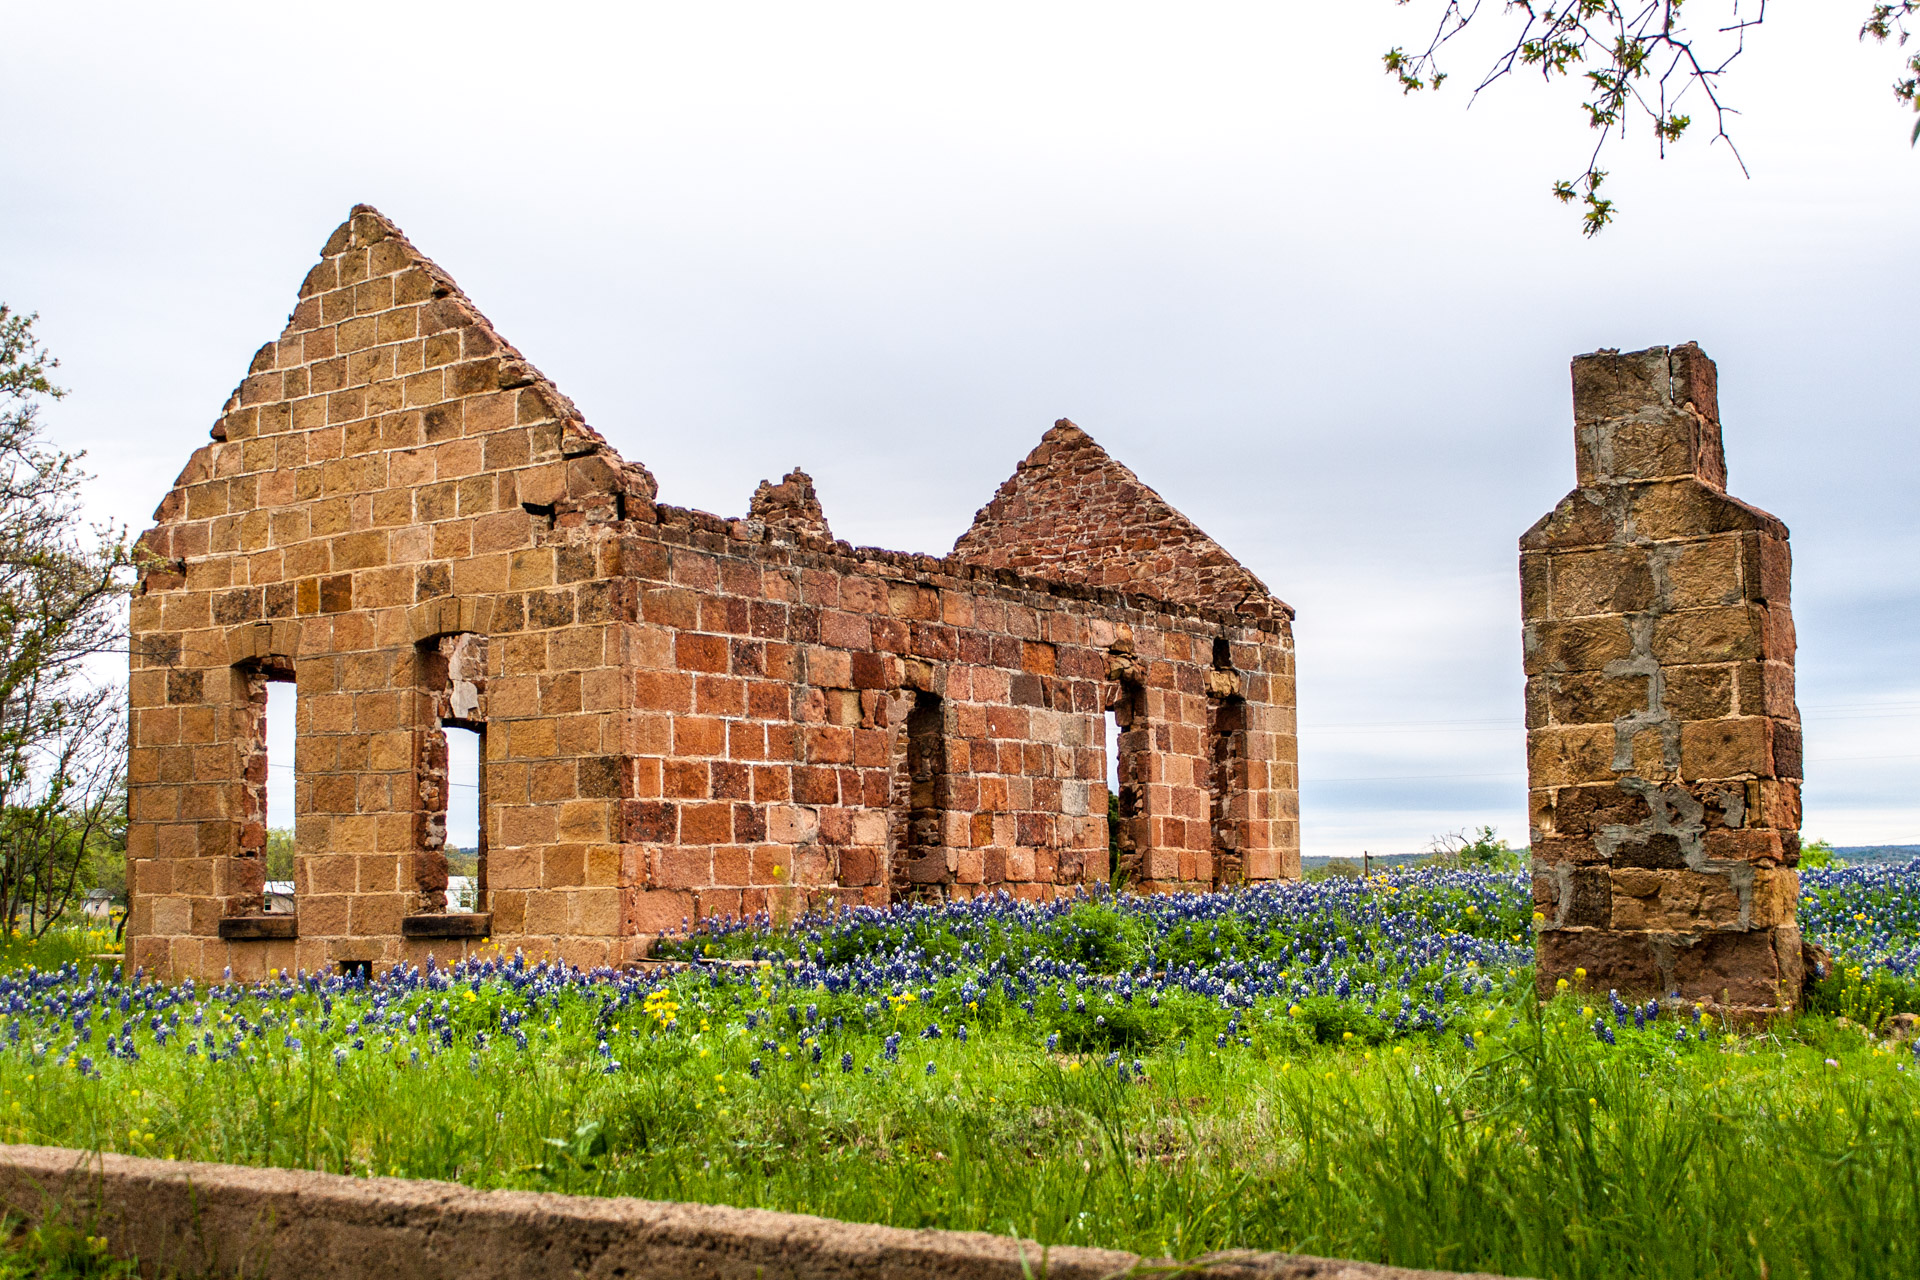 Pontotoc, Texas - A Stone Ruin With Bluebonnets